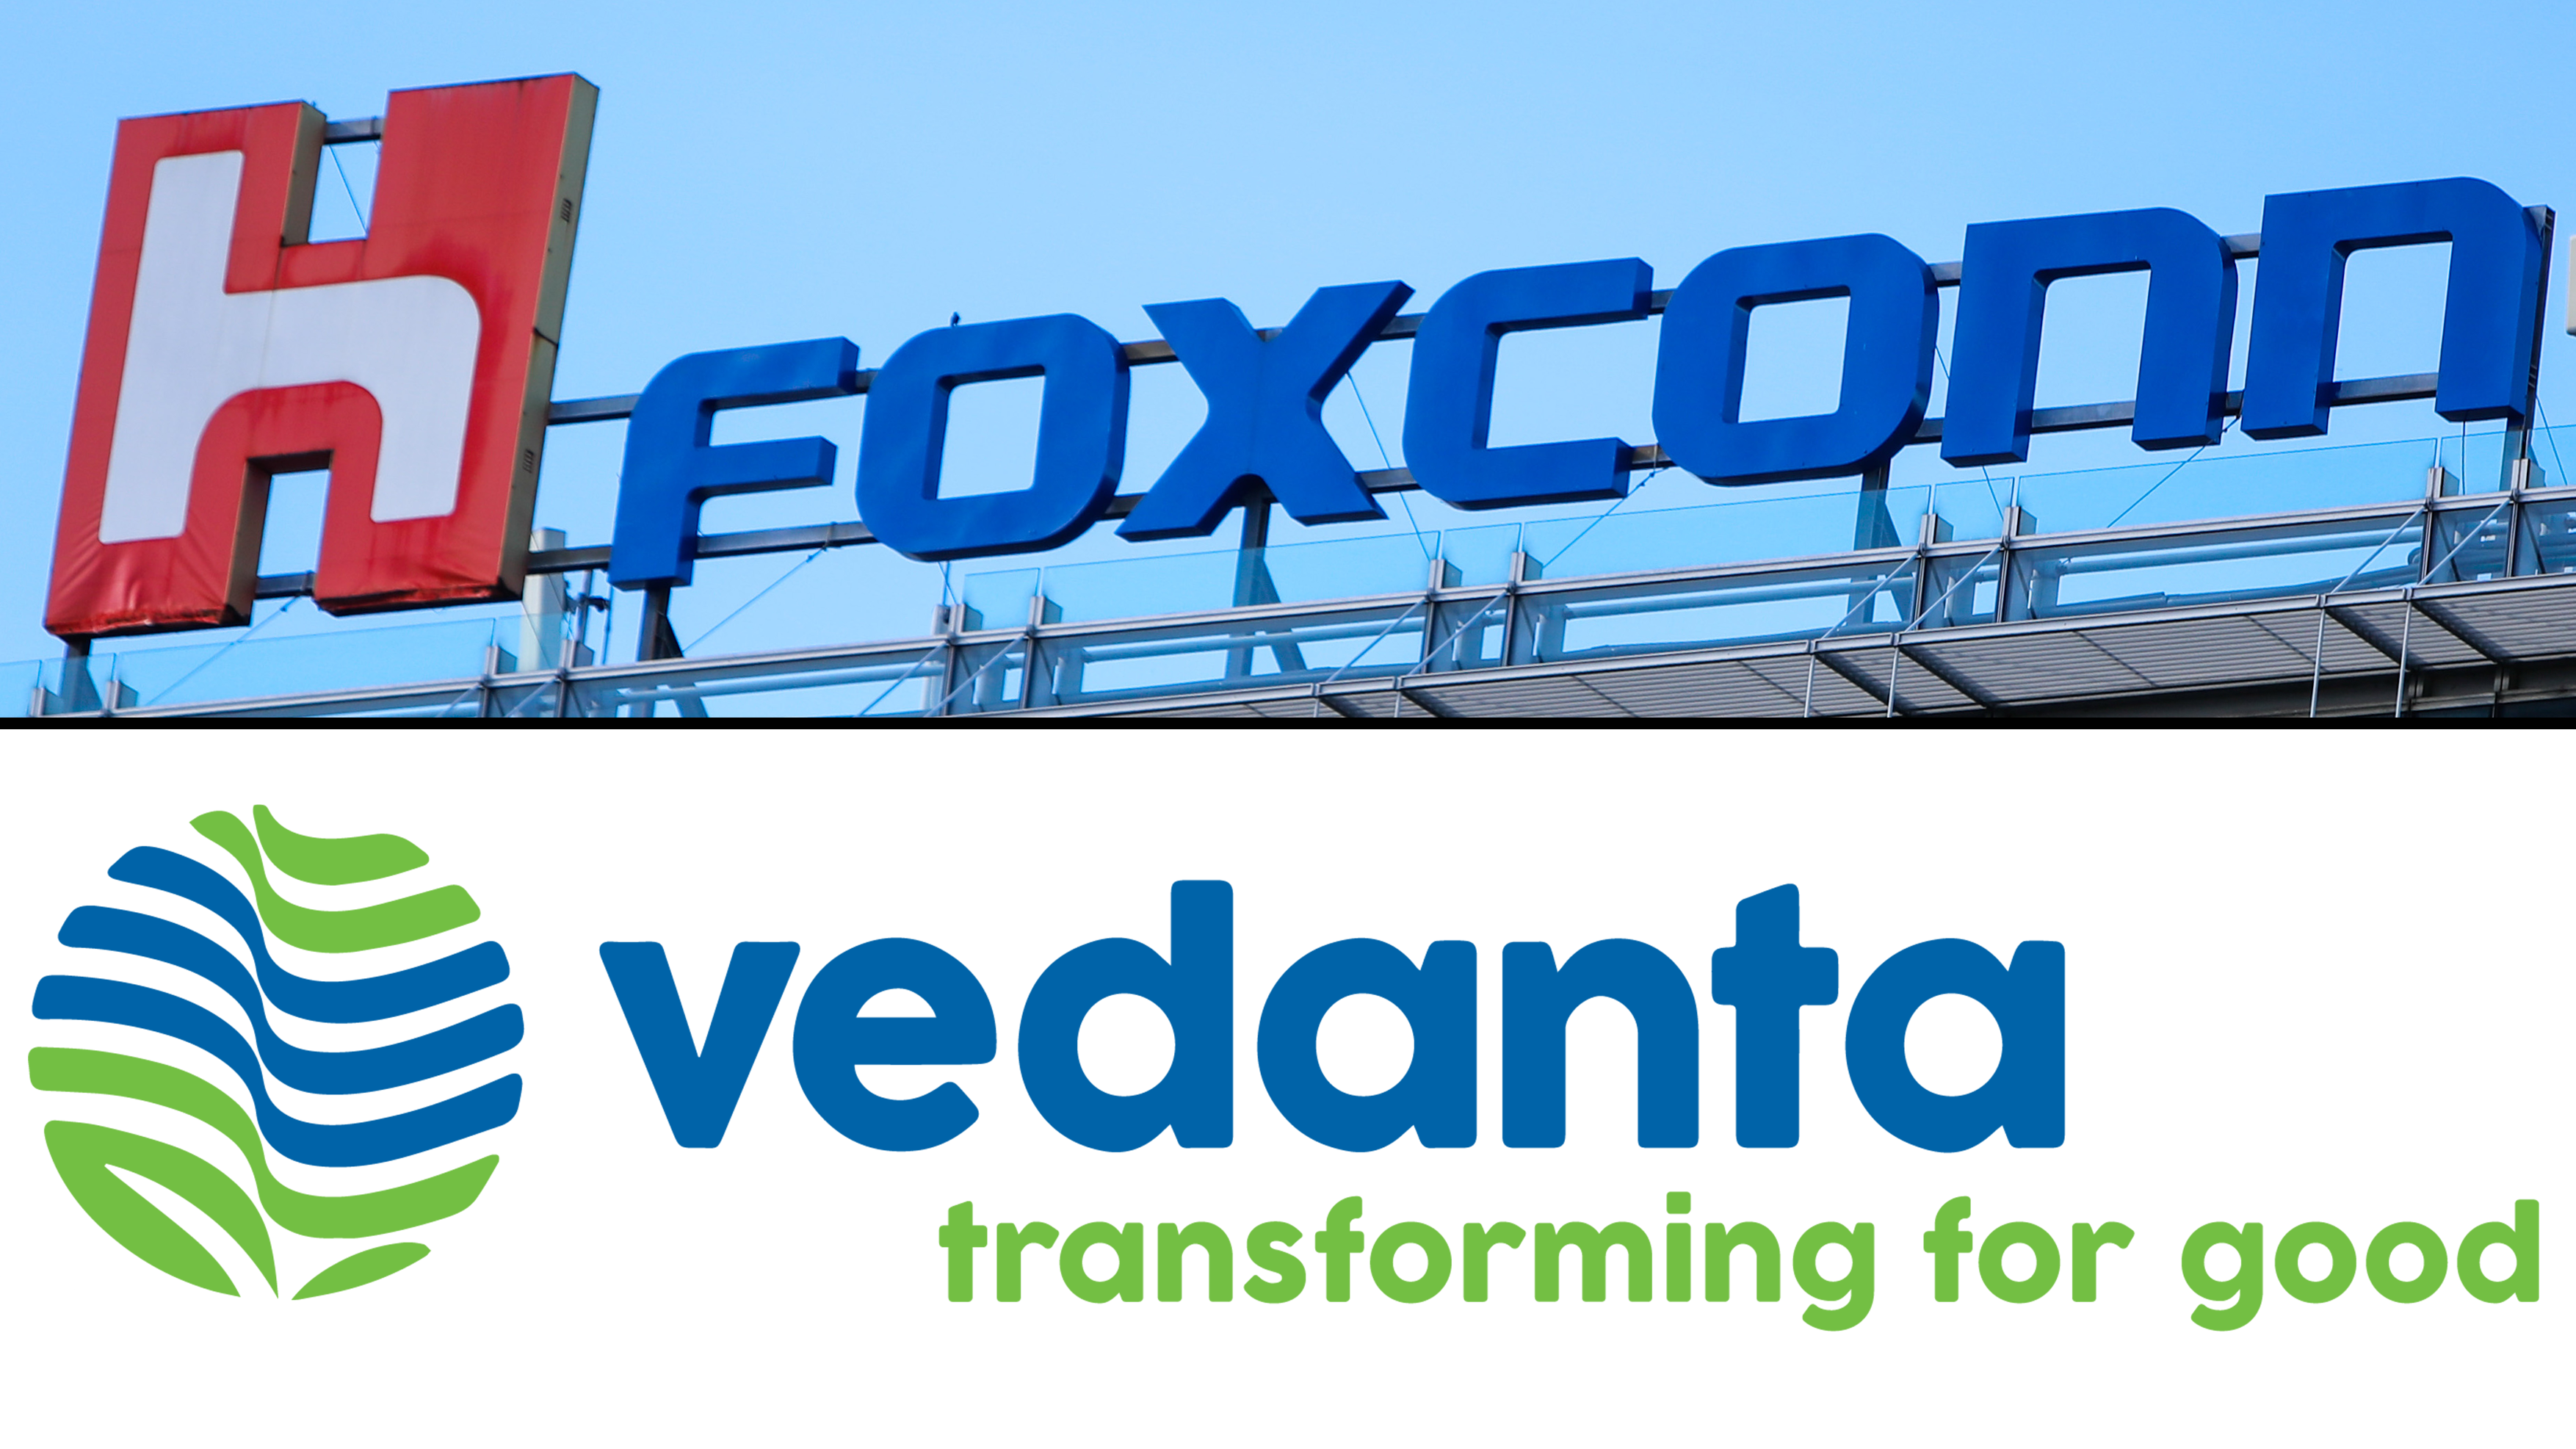 Vedanta and Foxconn to build $19.5bn chip plant in India’s Gujarat